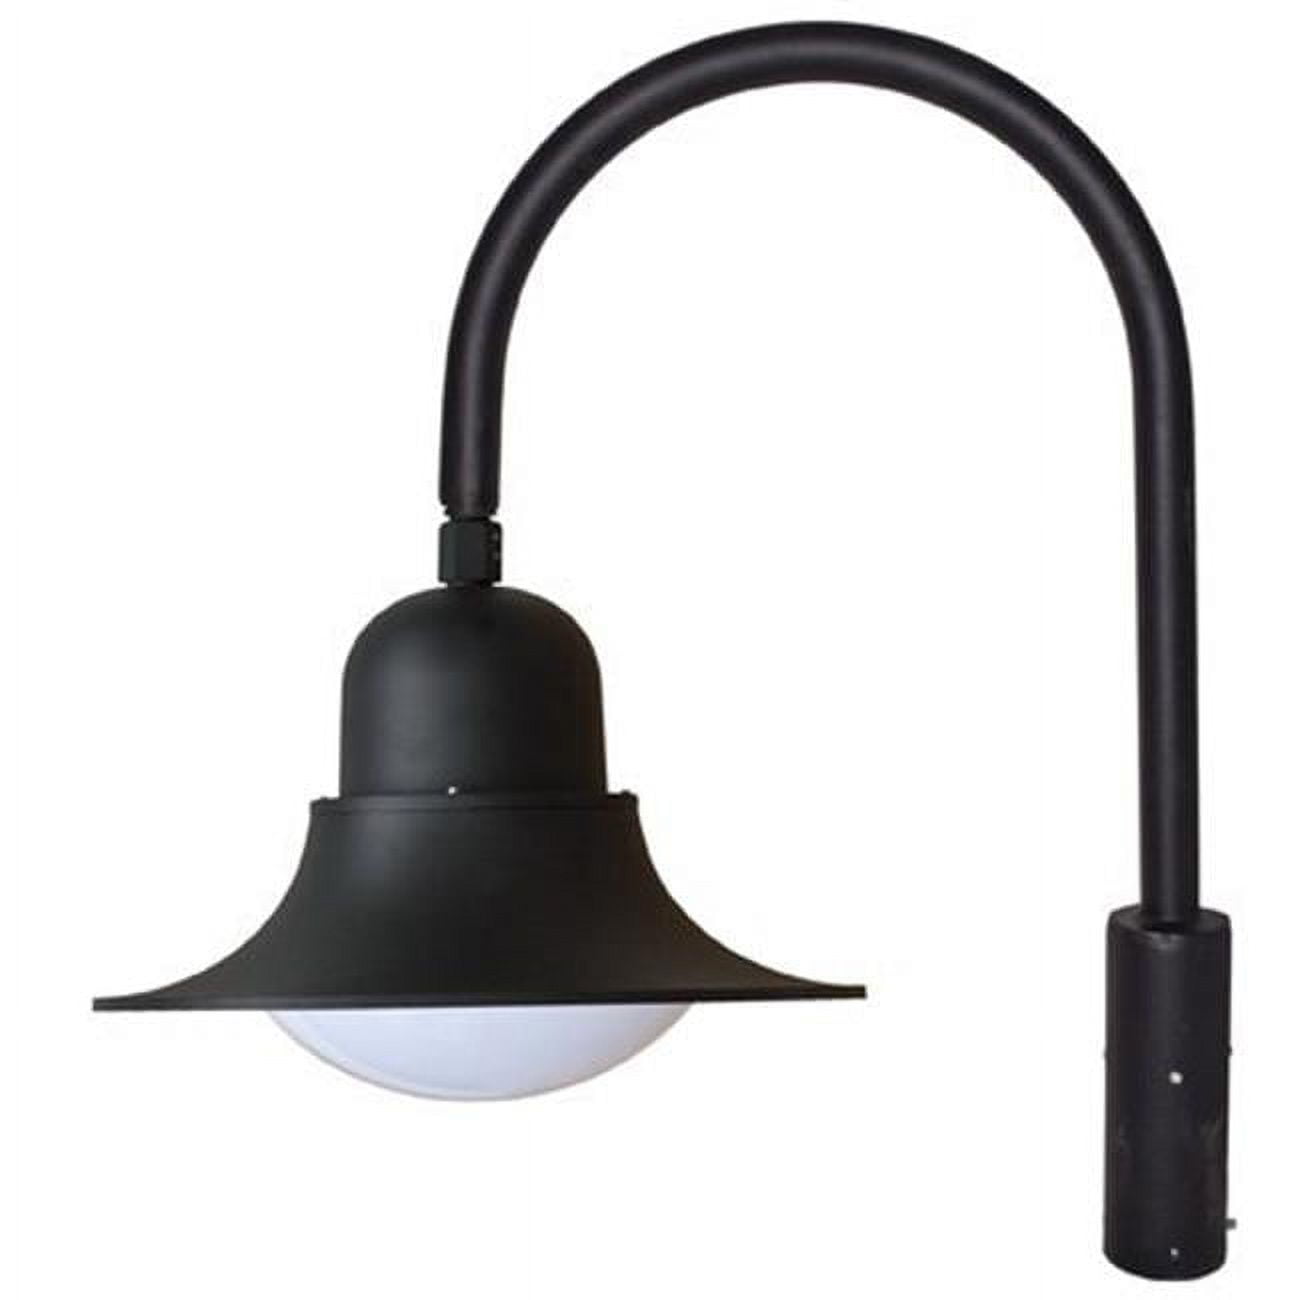 Picture of Dabmar Lighting GM616-B-MT 50W Powder Coated Cast Aluminum Post Top Light Fixture with Metal Halide Lamp, Black - 35.50 x 22 x 30.92 in.